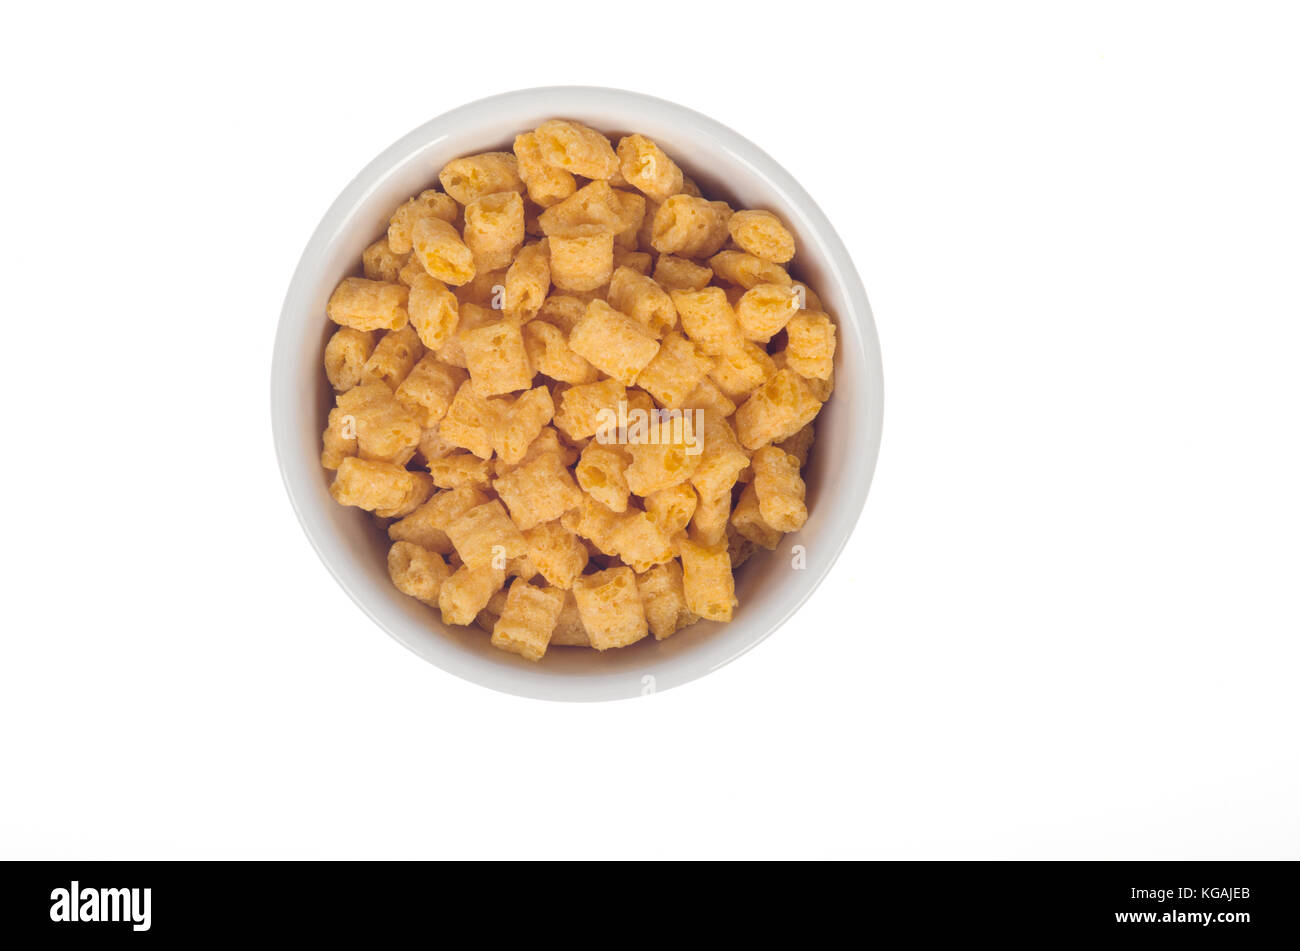 Bowl of Cap’n Crunch cereal by Quaker Oats on white background Stock Photo